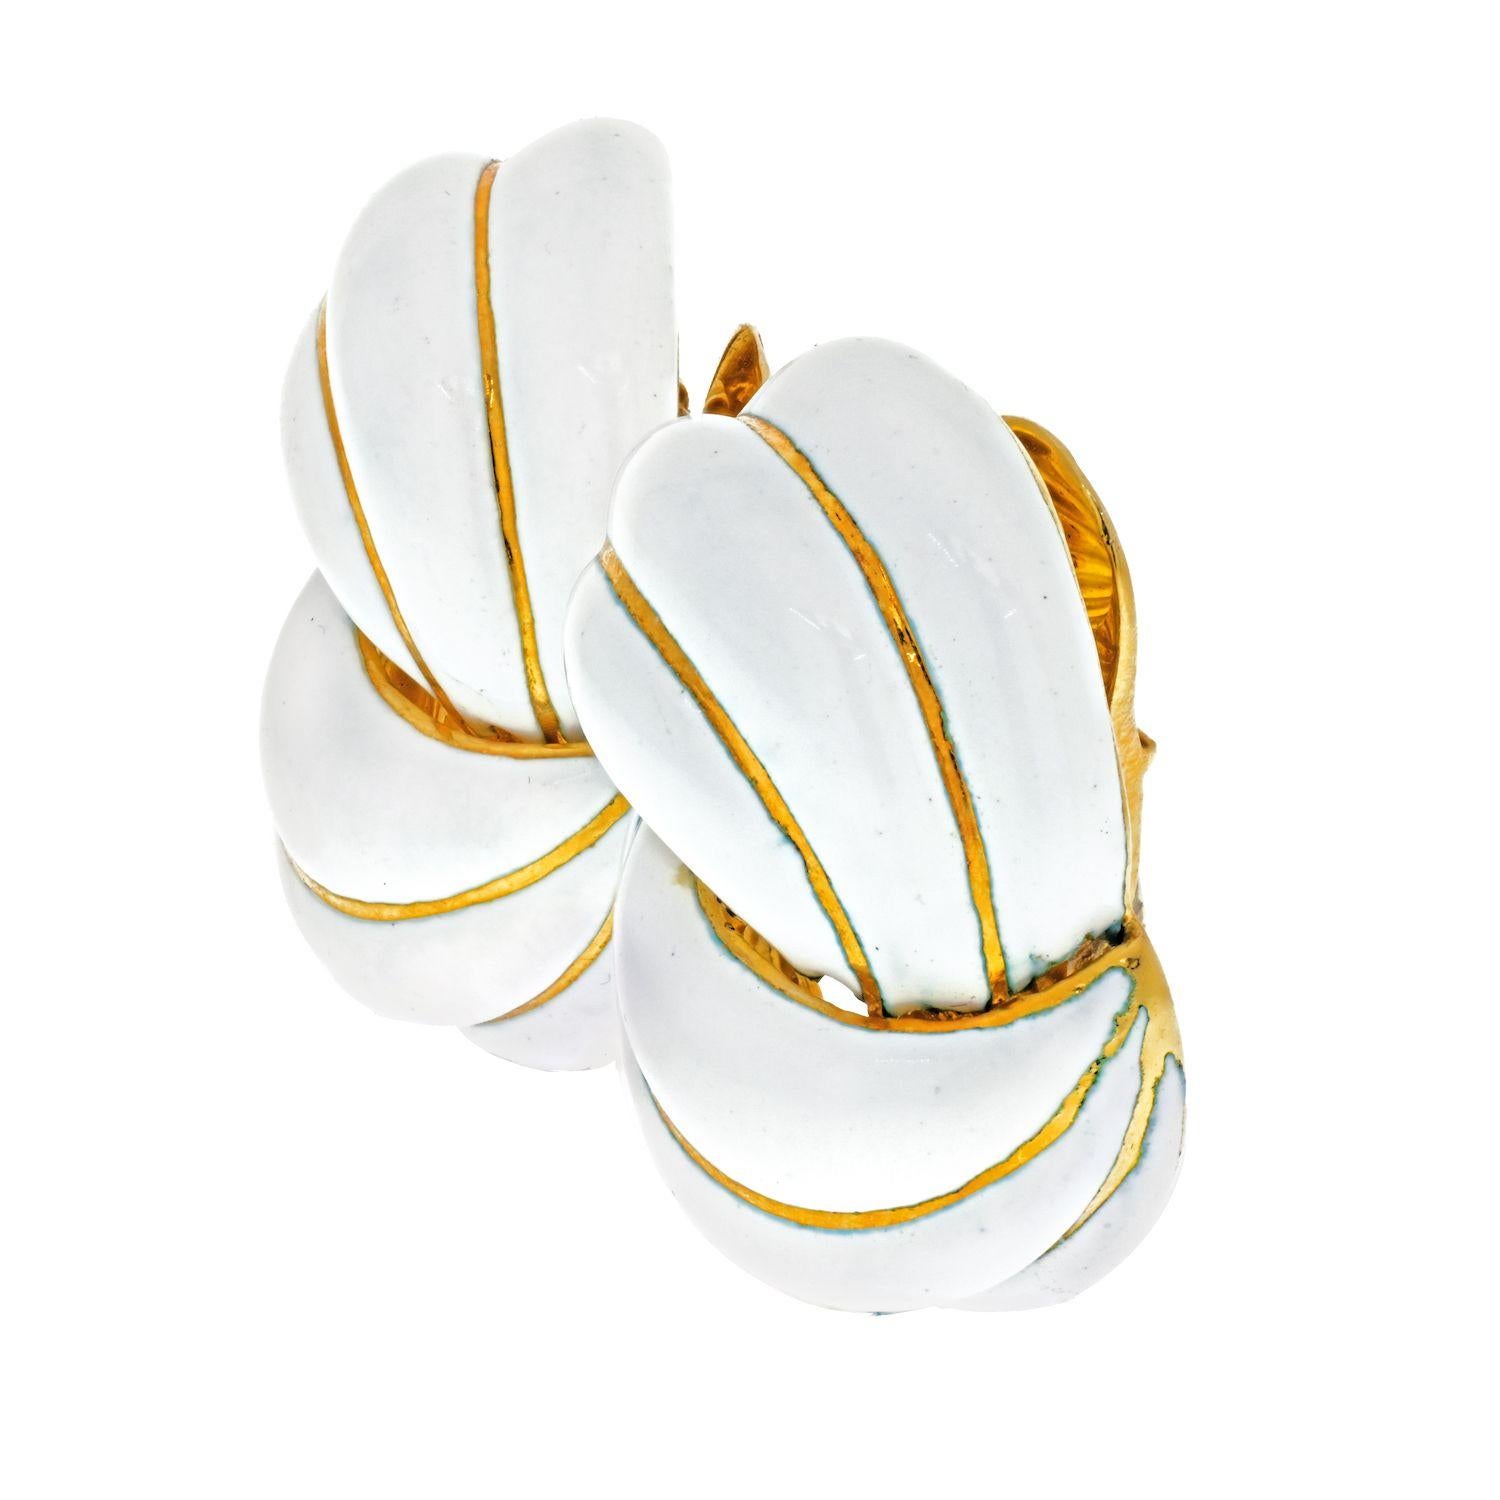 Elegant, fun and wearable all in one, these David Webb swirl design clip-on earrings are the classic 'day or night' style. Designed with striped white enamel and 18k yellow gold in an swirl, the huggie earrings weigh 32.8 grams and measure 1 1/8in.